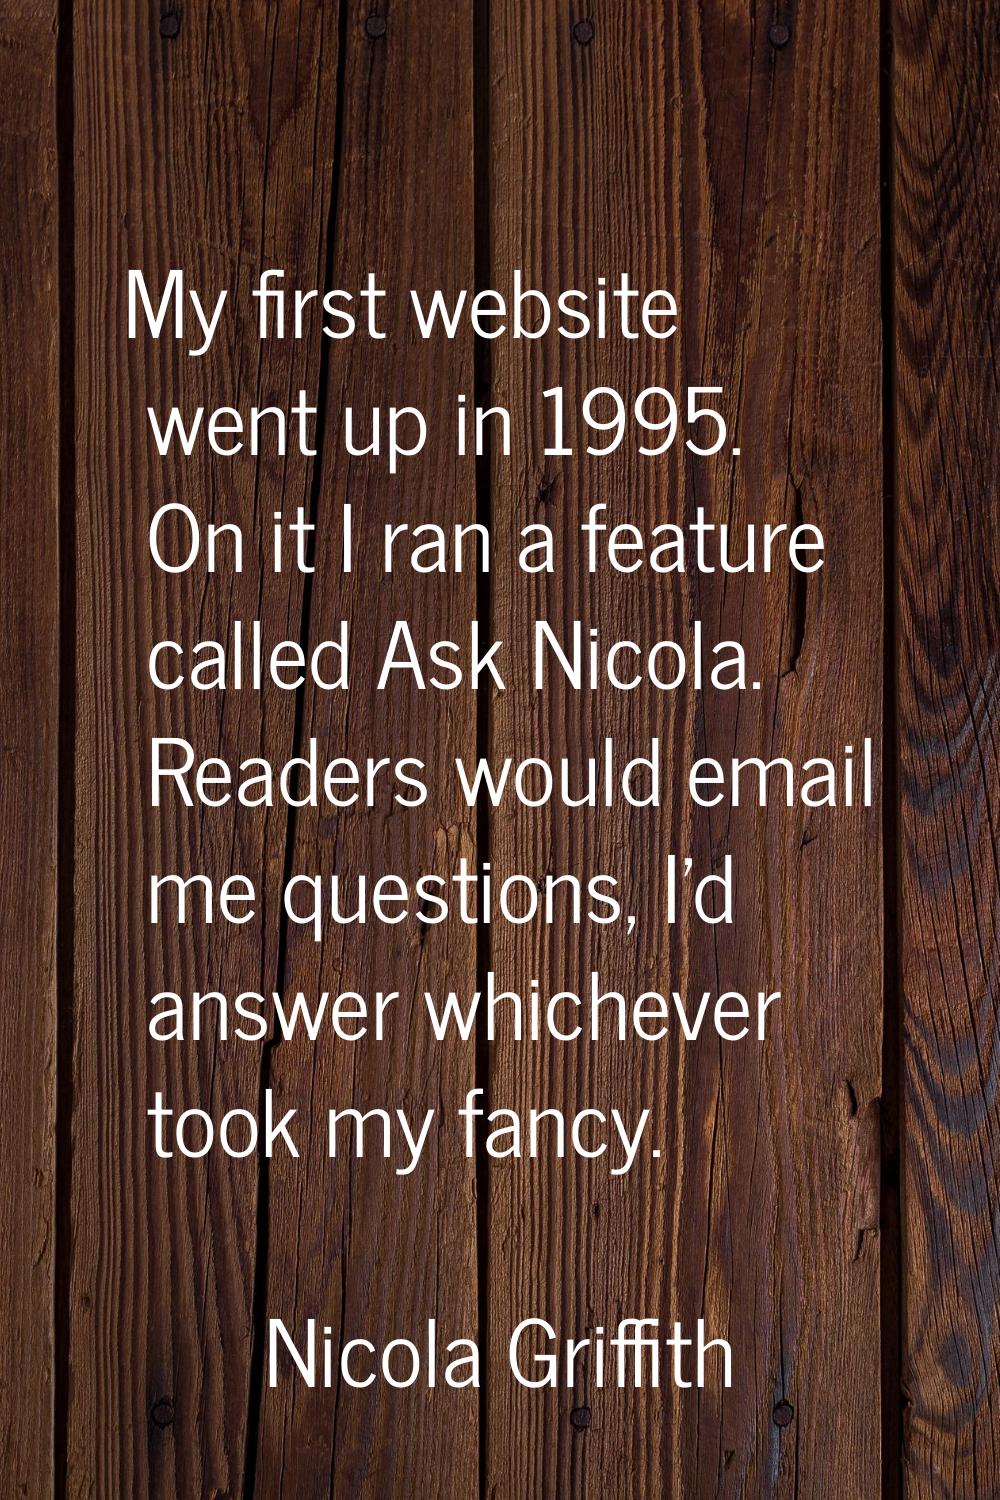 My first website went up in 1995. On it I ran a feature called Ask Nicola. Readers would email me q